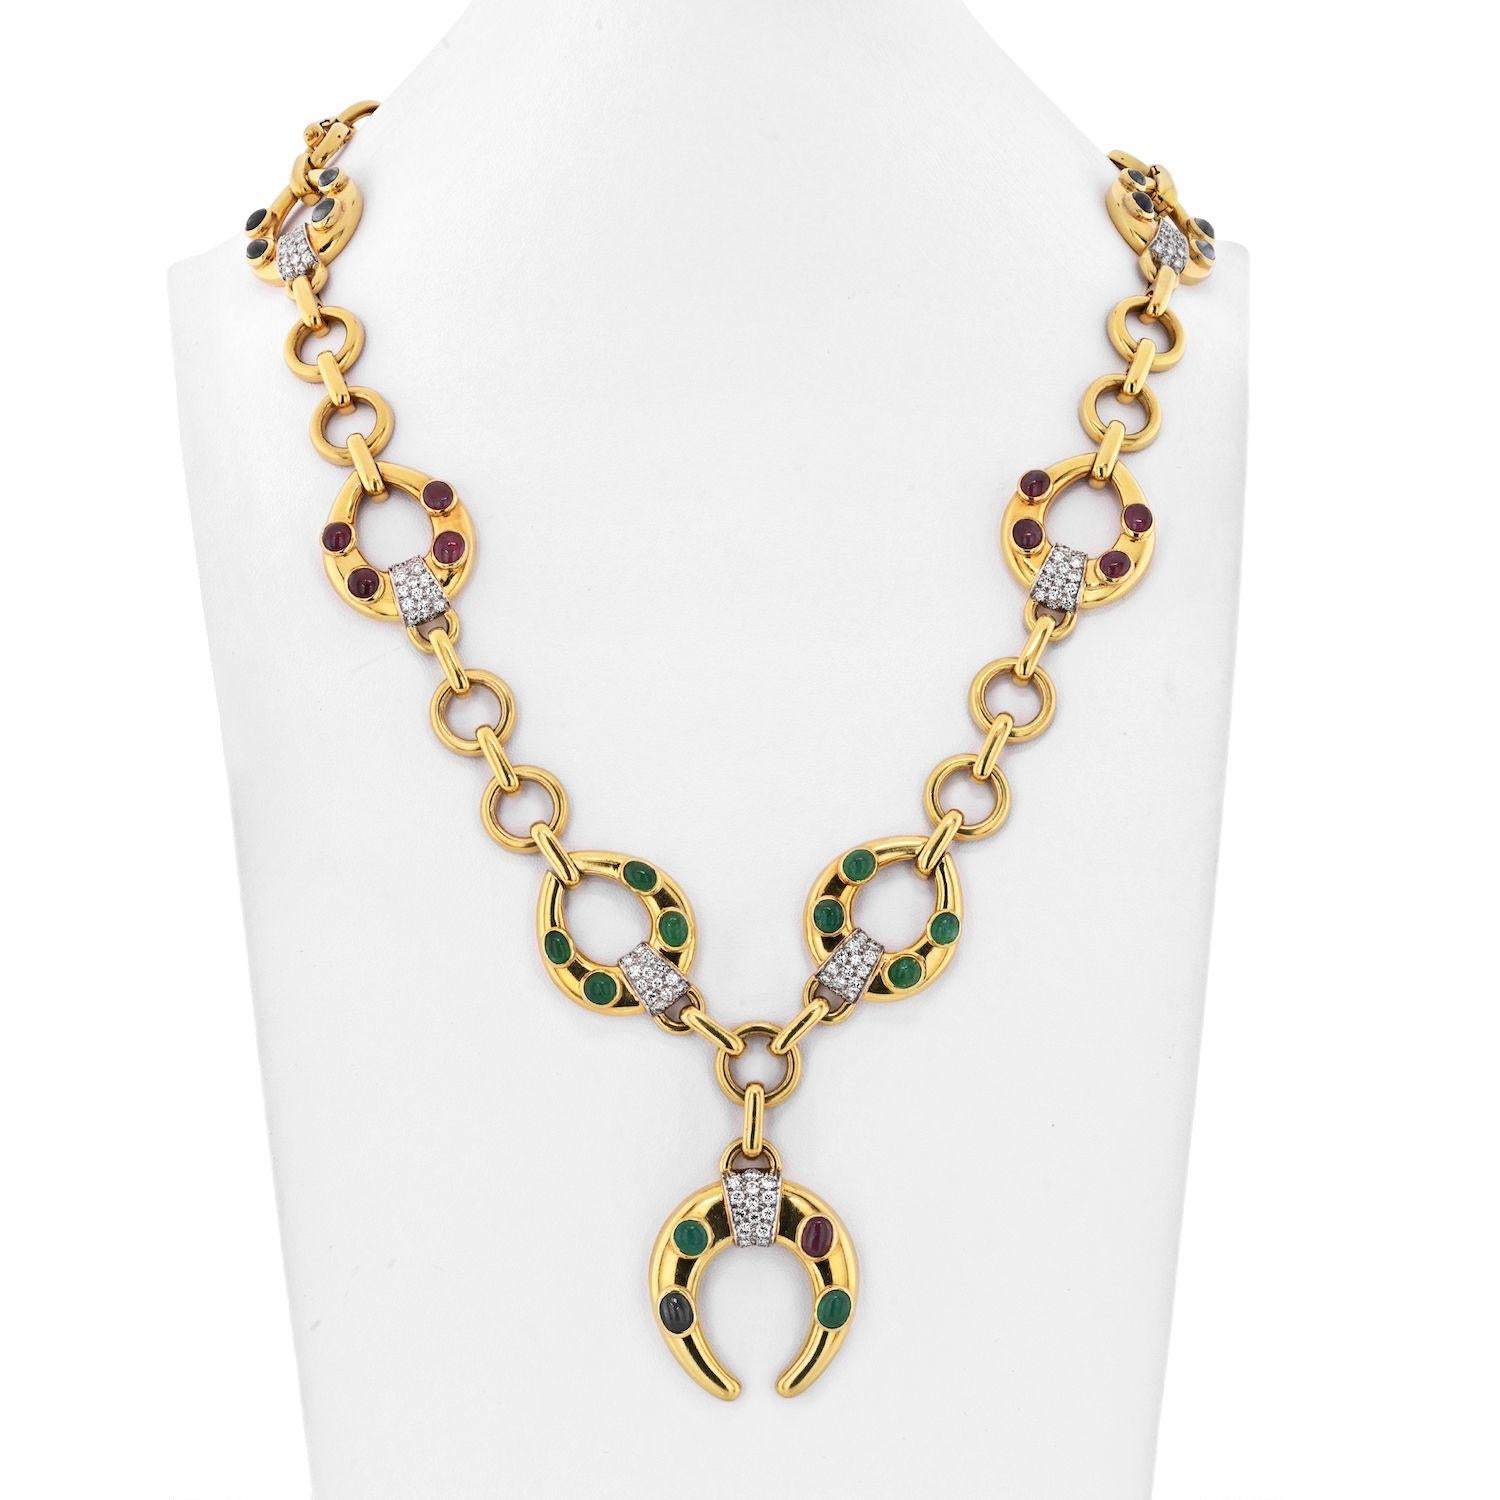 David Webb Convertible Horseshoe Necklace.
Those enduringly classic, horseshoe-shaped links are alluring, no doubt. The fact that they're adorned with all manner of glimmering gemstones doesn't hurt, either. But what'll really seal the deal are the